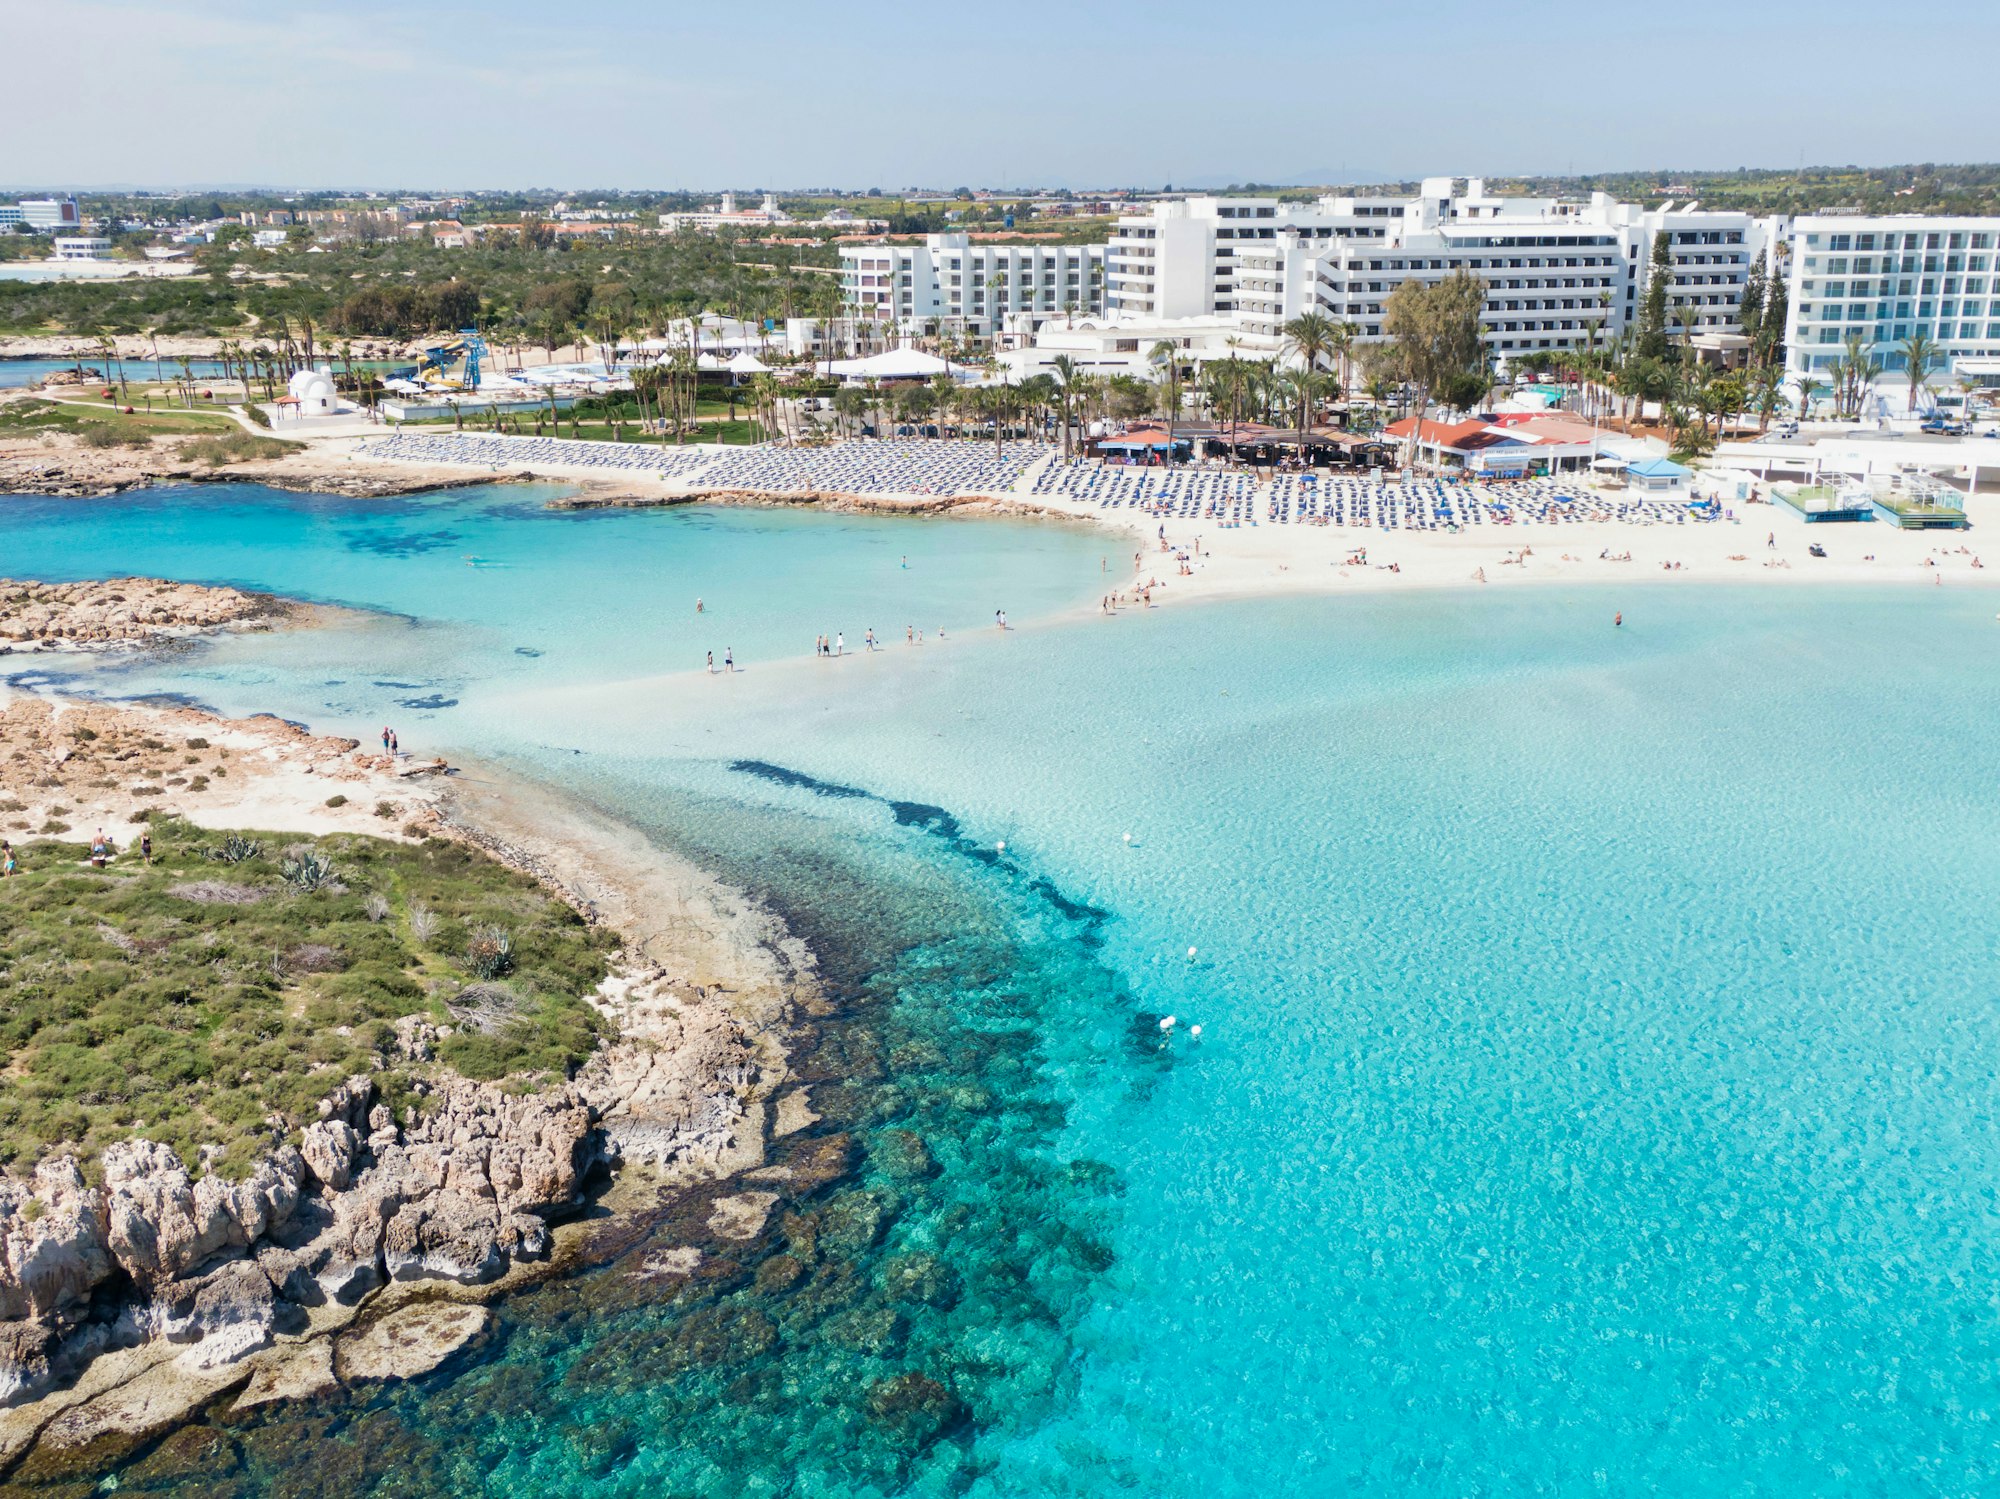 aerial view of Cyprus beach during daytime